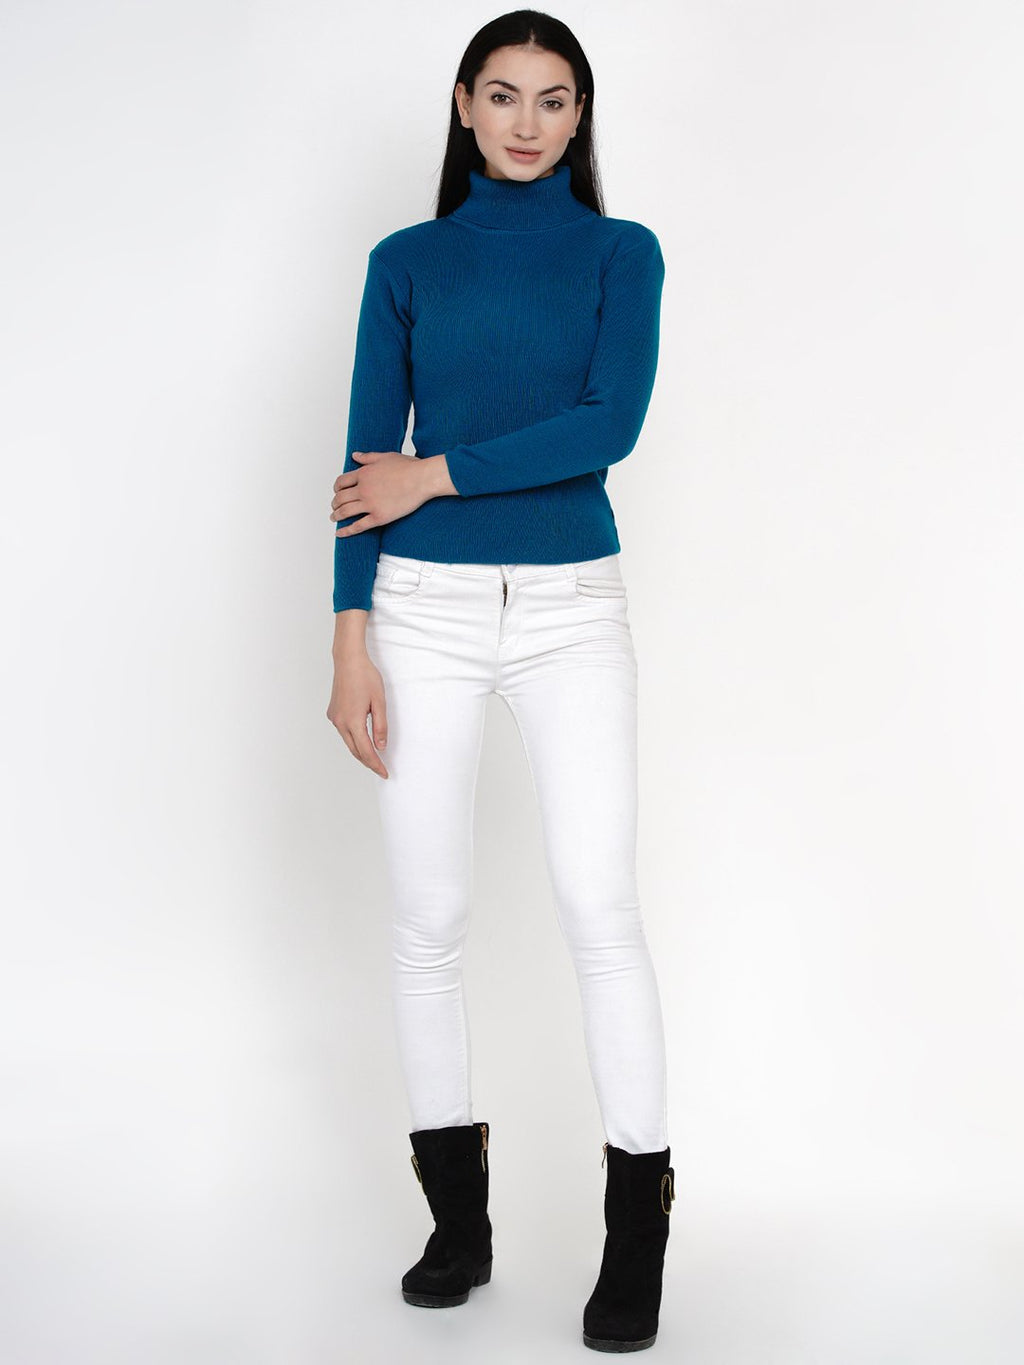 Fabnest Winter Turquoise High Neck Sweater-Sweaters-Fabnest